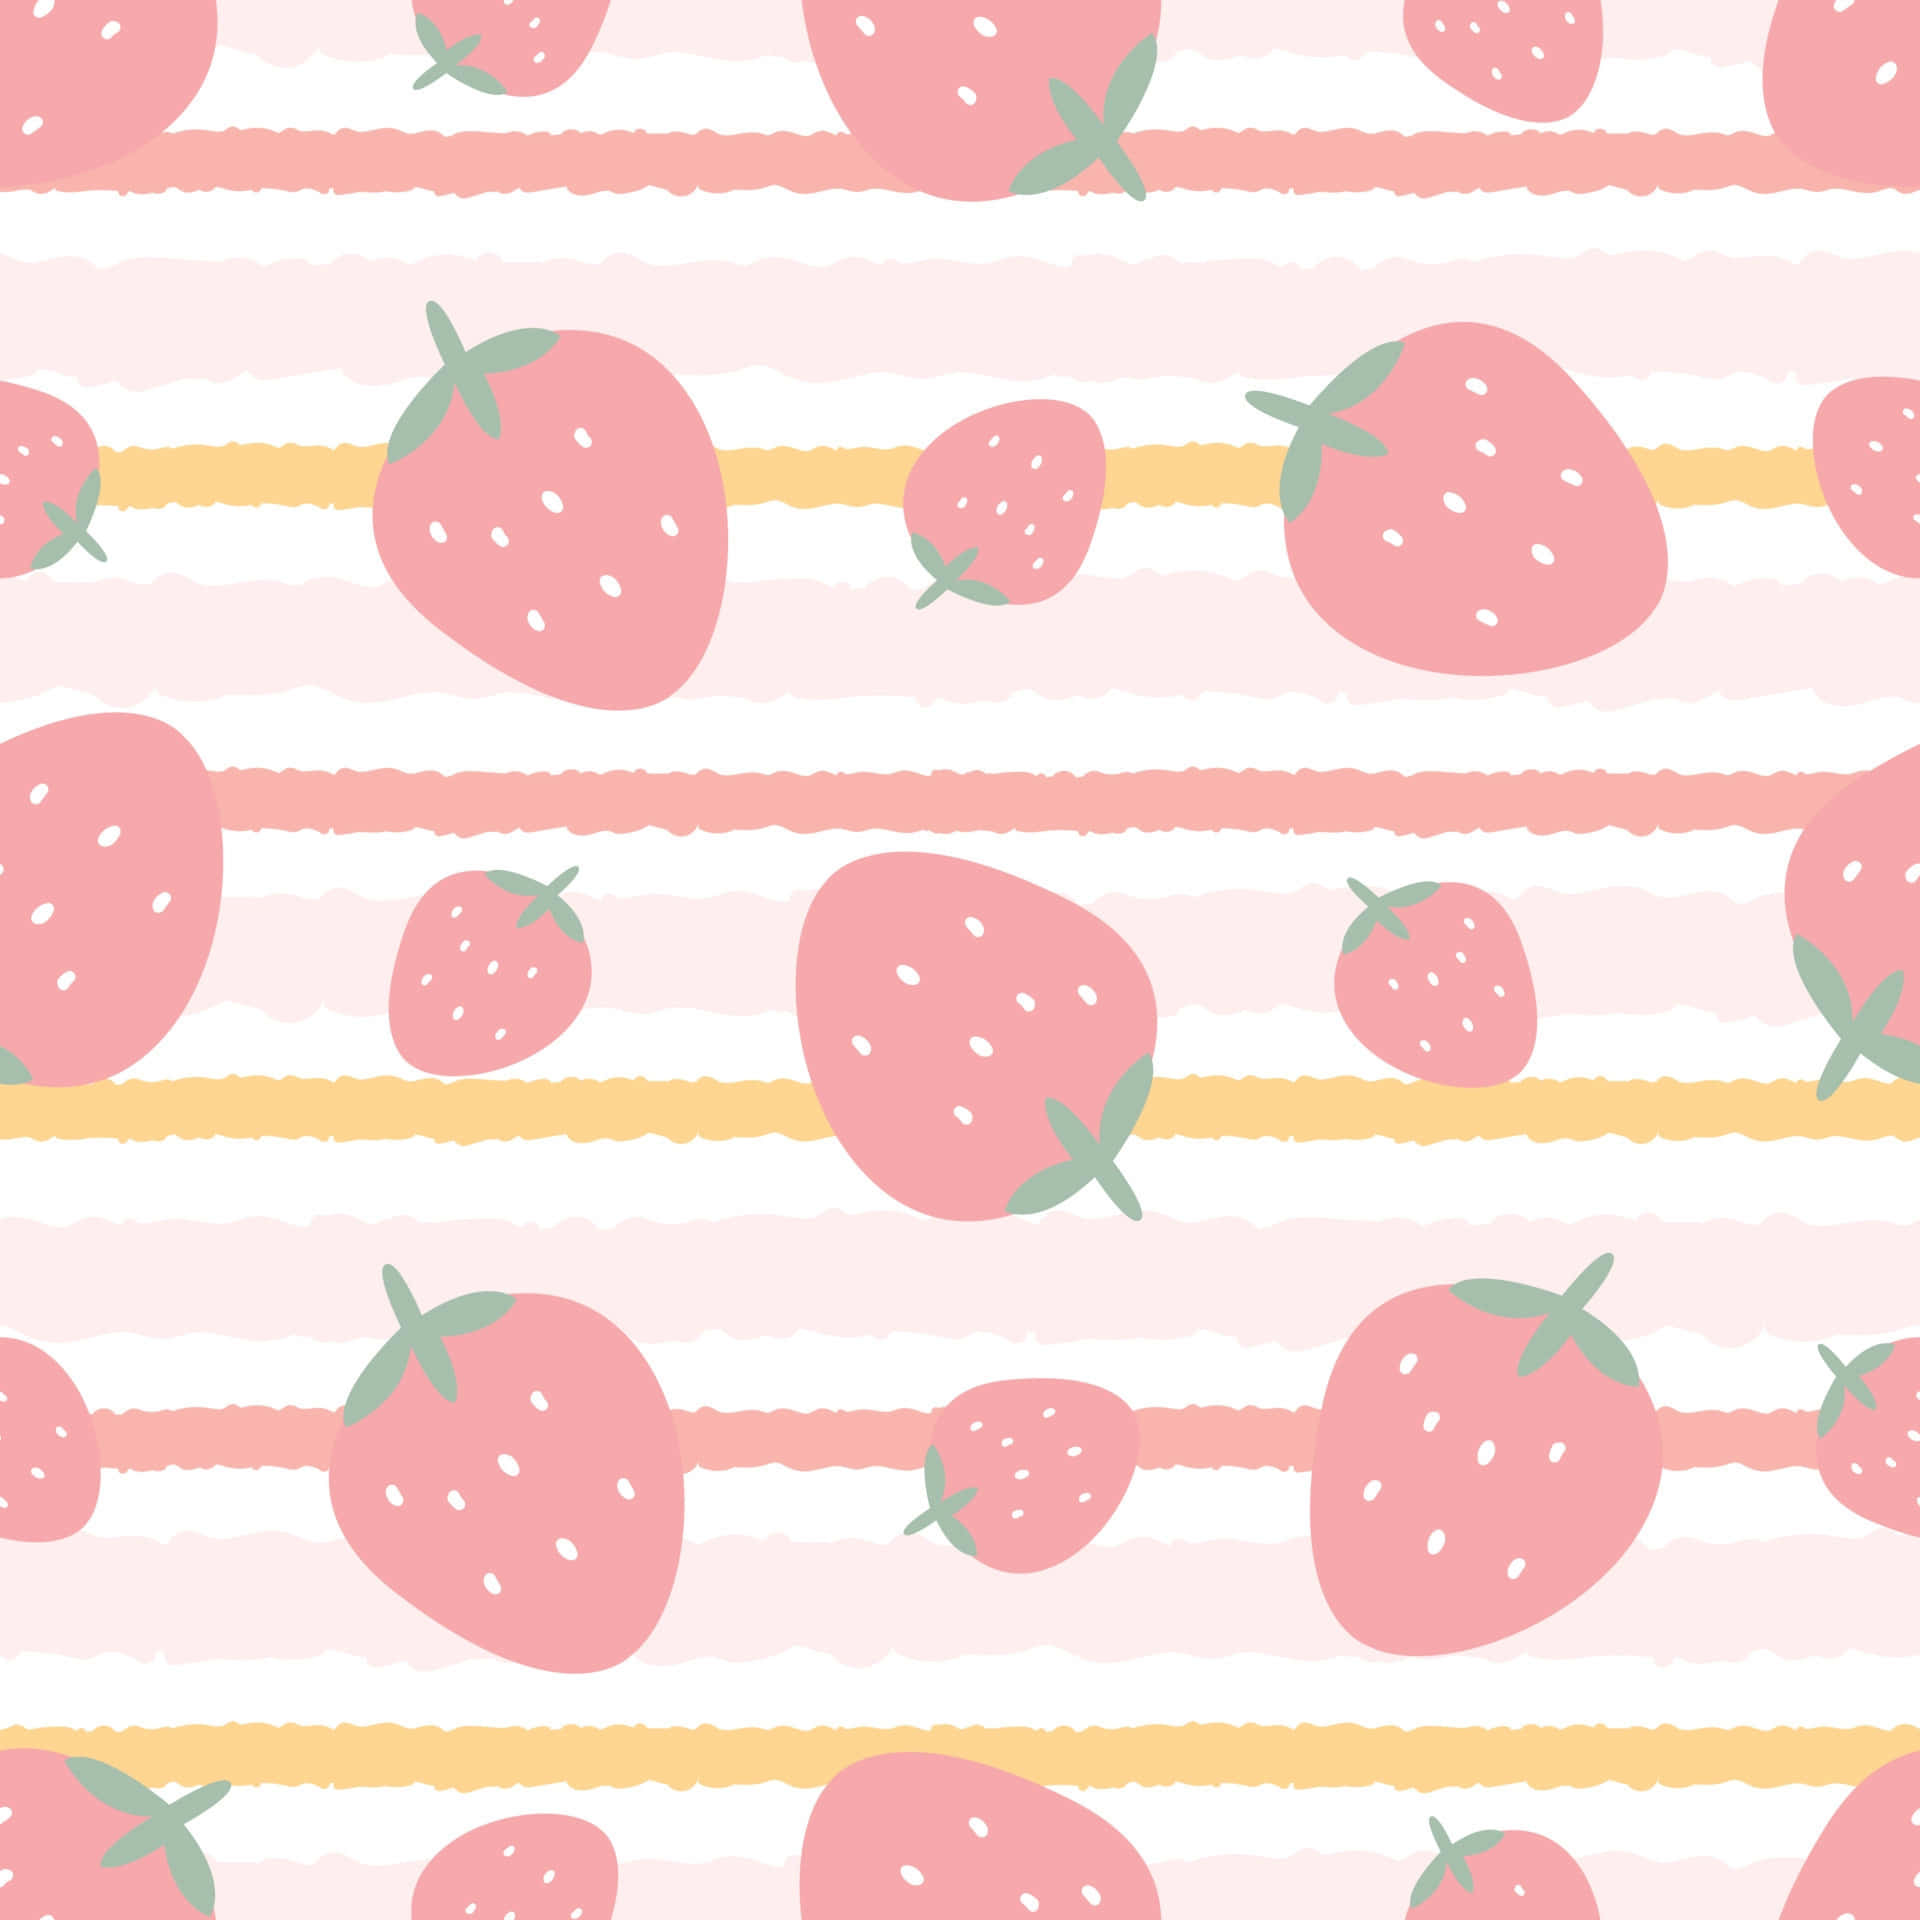 Enjoy the Sweetness of Life with Pastel Strawberry Wallpaper